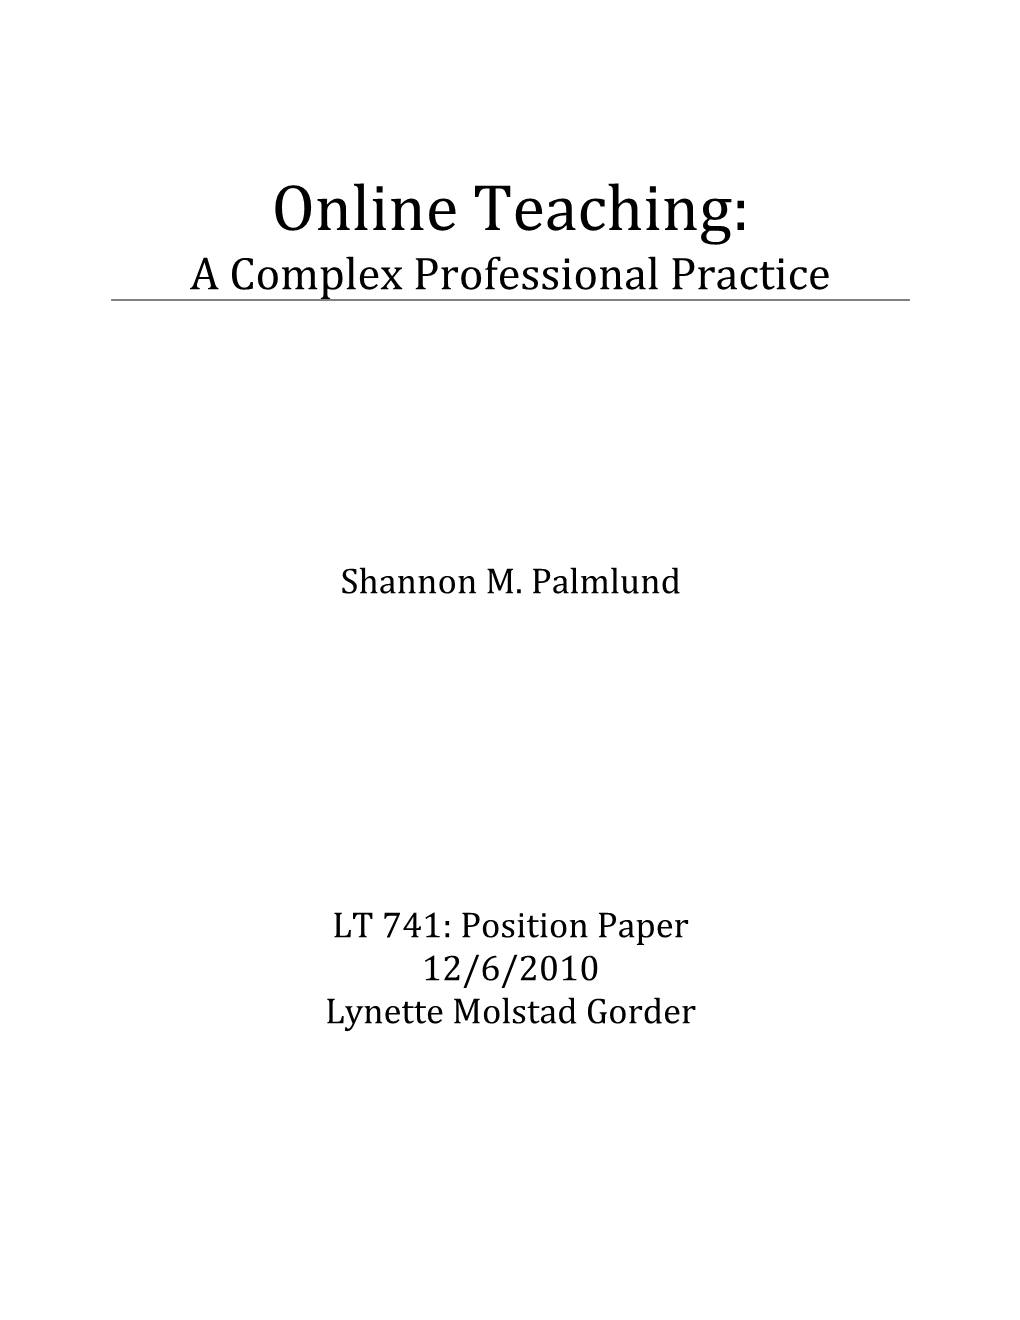 Online Teaching: a Complex Professional Practice